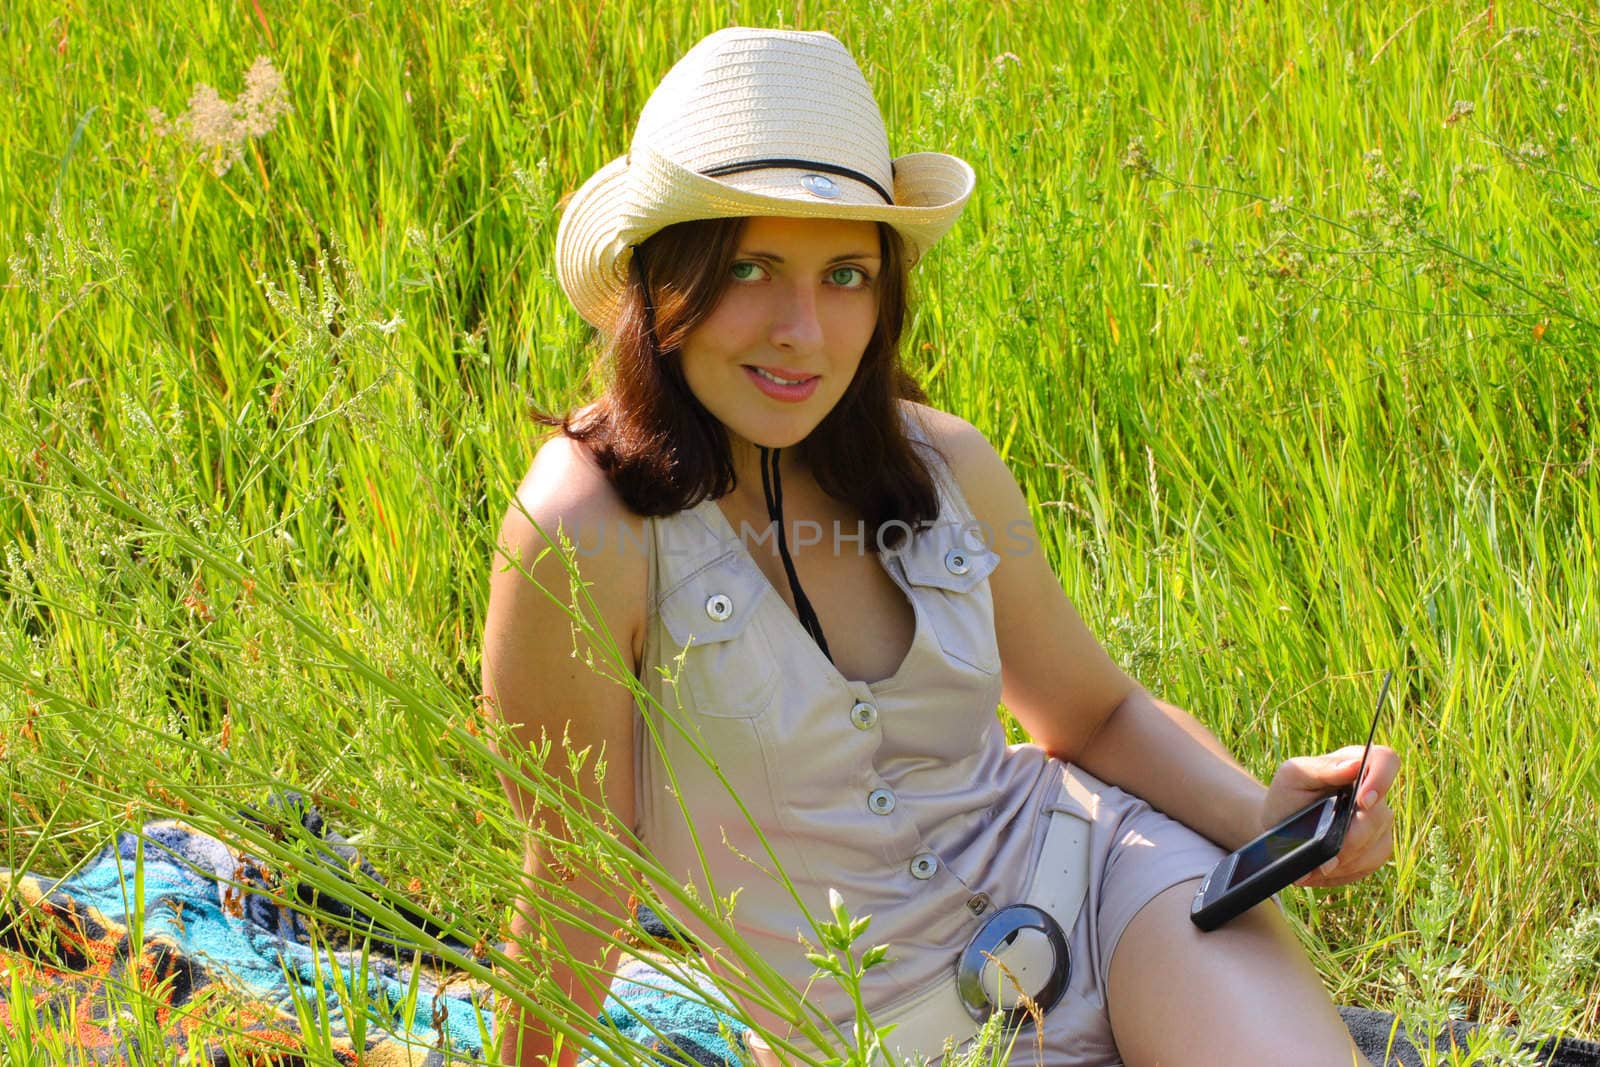 The girl sitting on a summer meadow with handheld